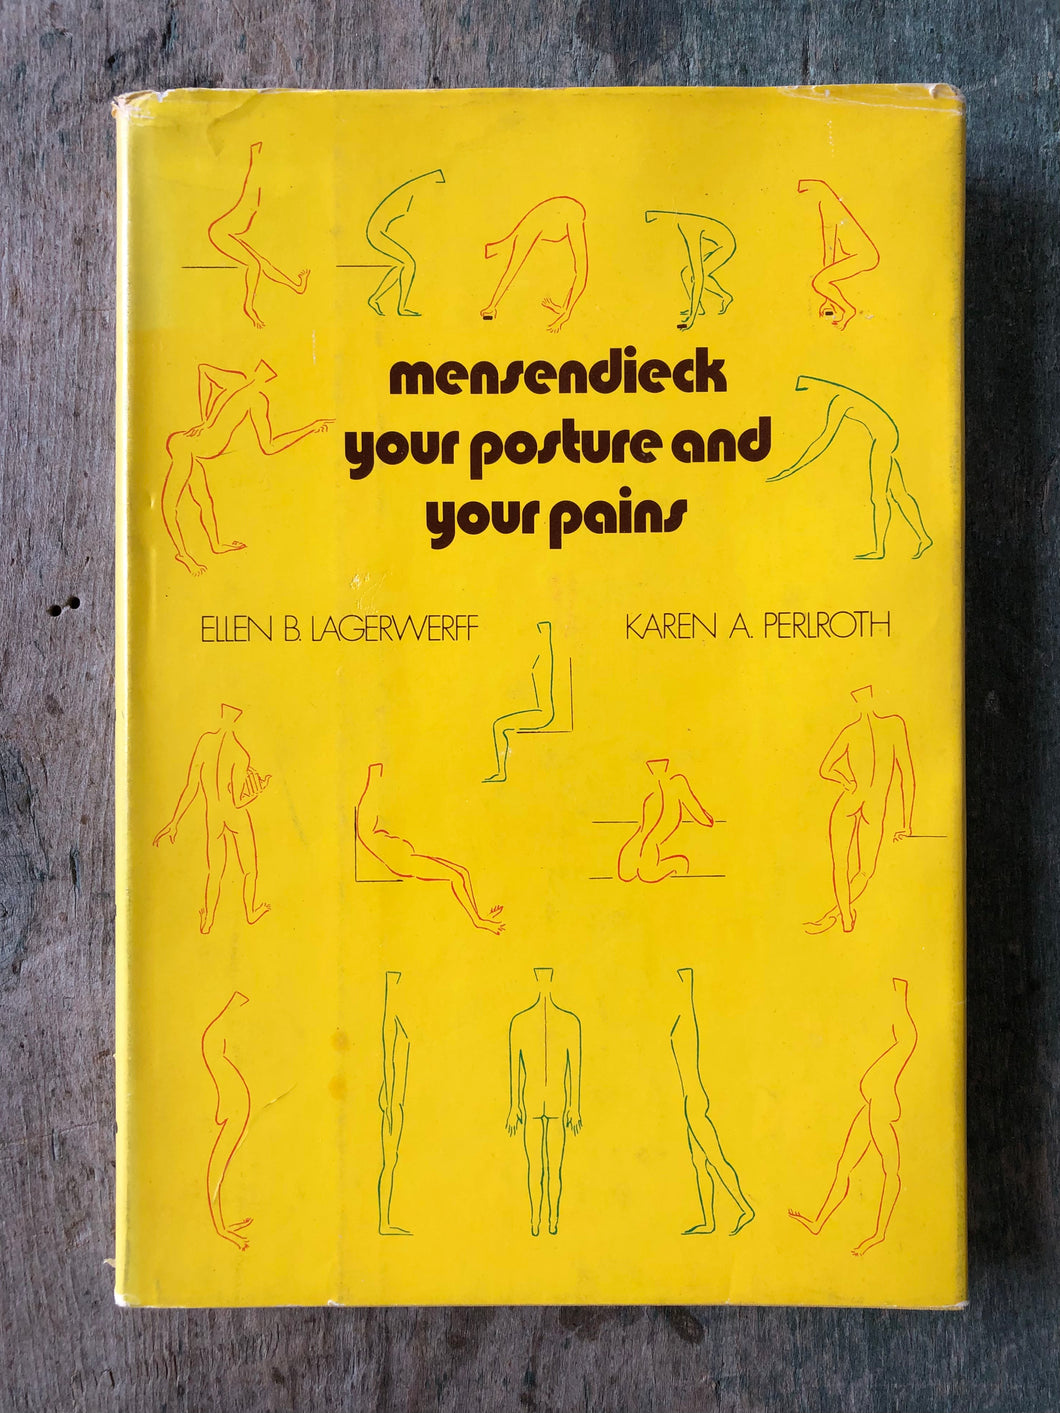 Mensendieck: Your Posture and Your Pains by Ellen B Lagerwerff and Karen A. Perlroth